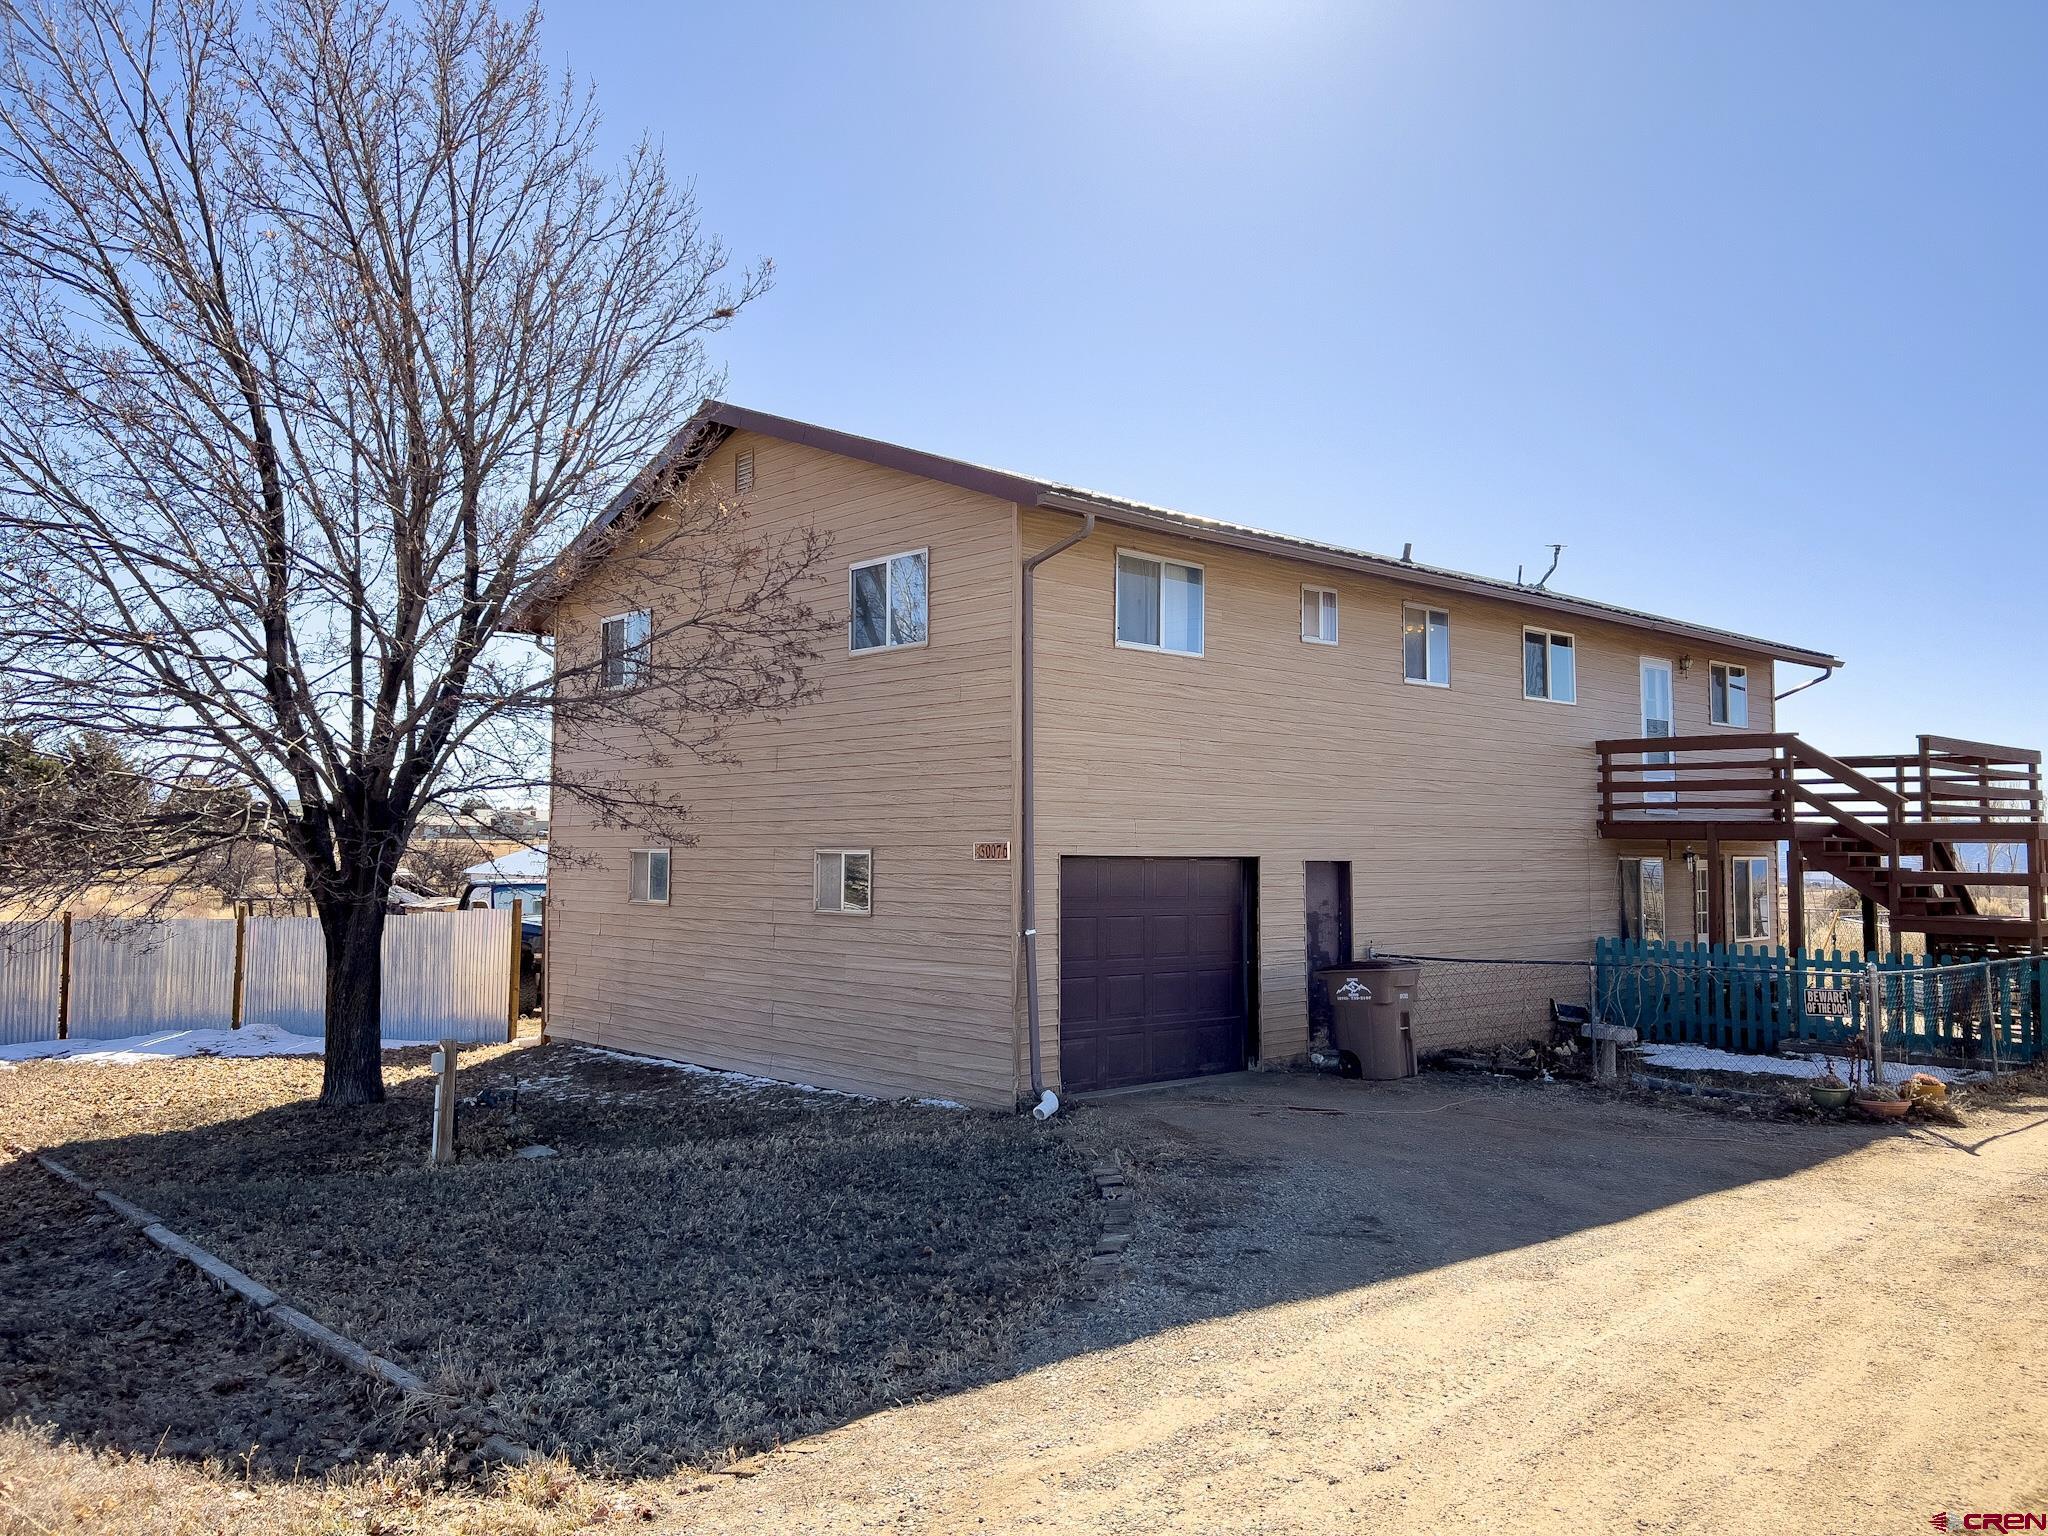 Photo of 30076 Rd S6 in Dolores, CO